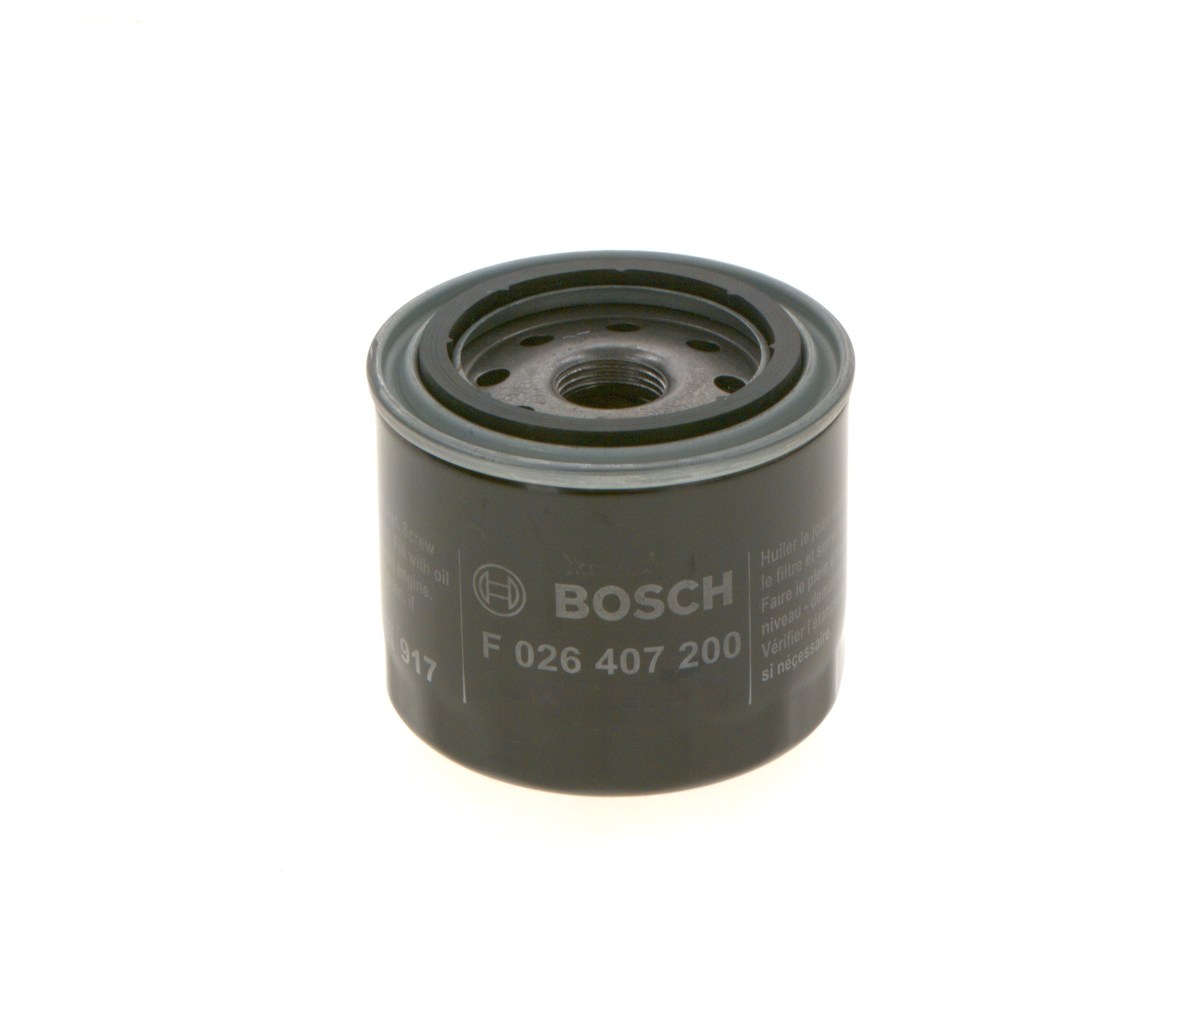 P 7200 BOSCH M 20 x 1,5, with one anti-return valve, Spin-on Filter Inner Diameter 2: 57mm, Outer Diameter 2: 66mm, Ø: 82mm, Height: 72mm Oil filters F 026 407 200 buy